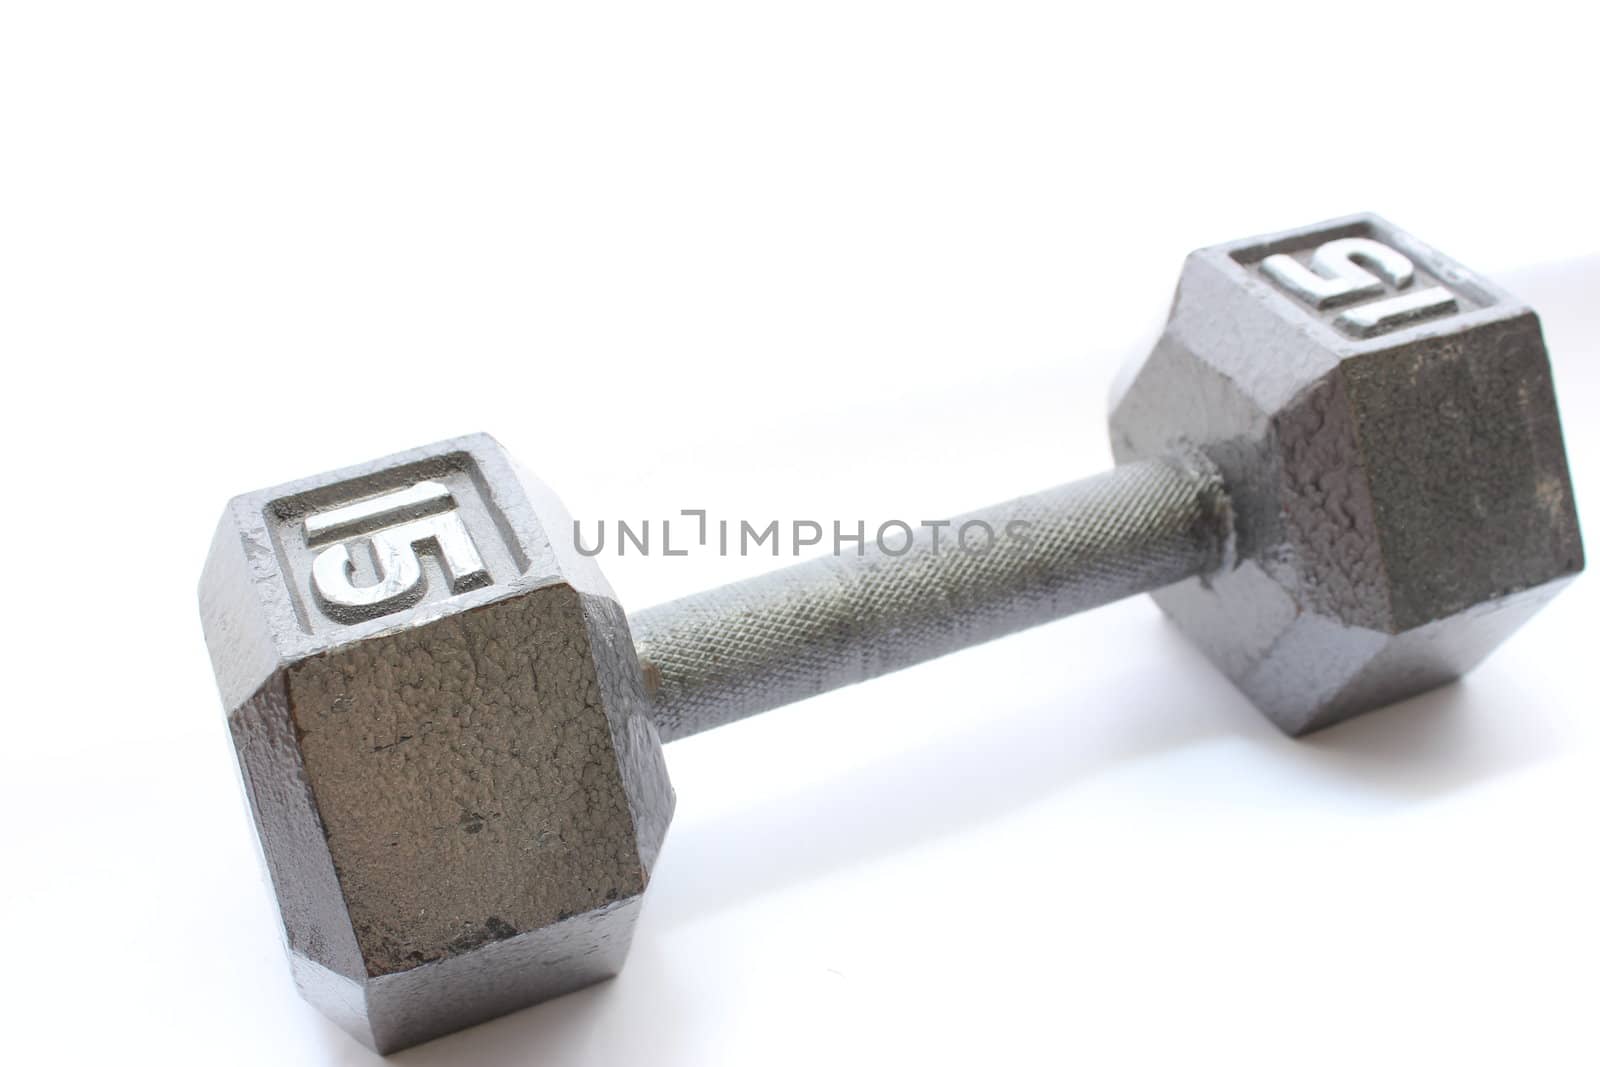 15 Pound Dumbbell by abhbah05